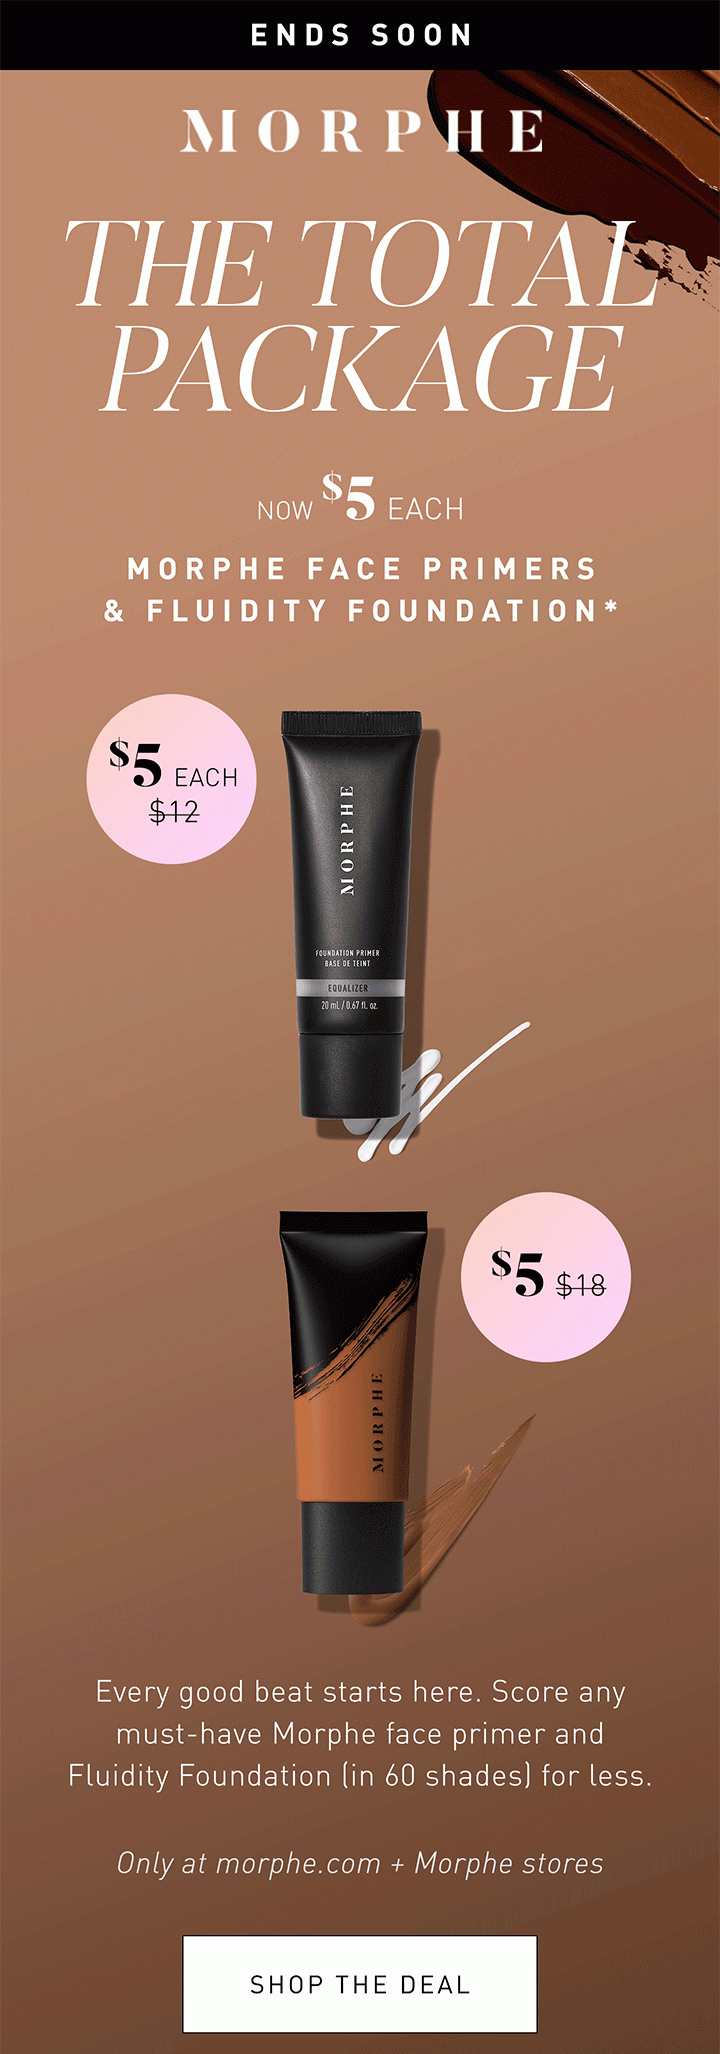 MORPHE LIMITED TIME ONLY THE TOTAL PACKAGE NOW $5 EACH MORPHE FACE PRIMERS & FLUIDITY FOUNDATION* $5 EACH $12 $5 $18 Every good beat starts here. Score any must-have Morphe face primer and Fluidity Foundation (in 60 shades) for less. Only at morphe.com + Morphe stores SHOP THE DEAL